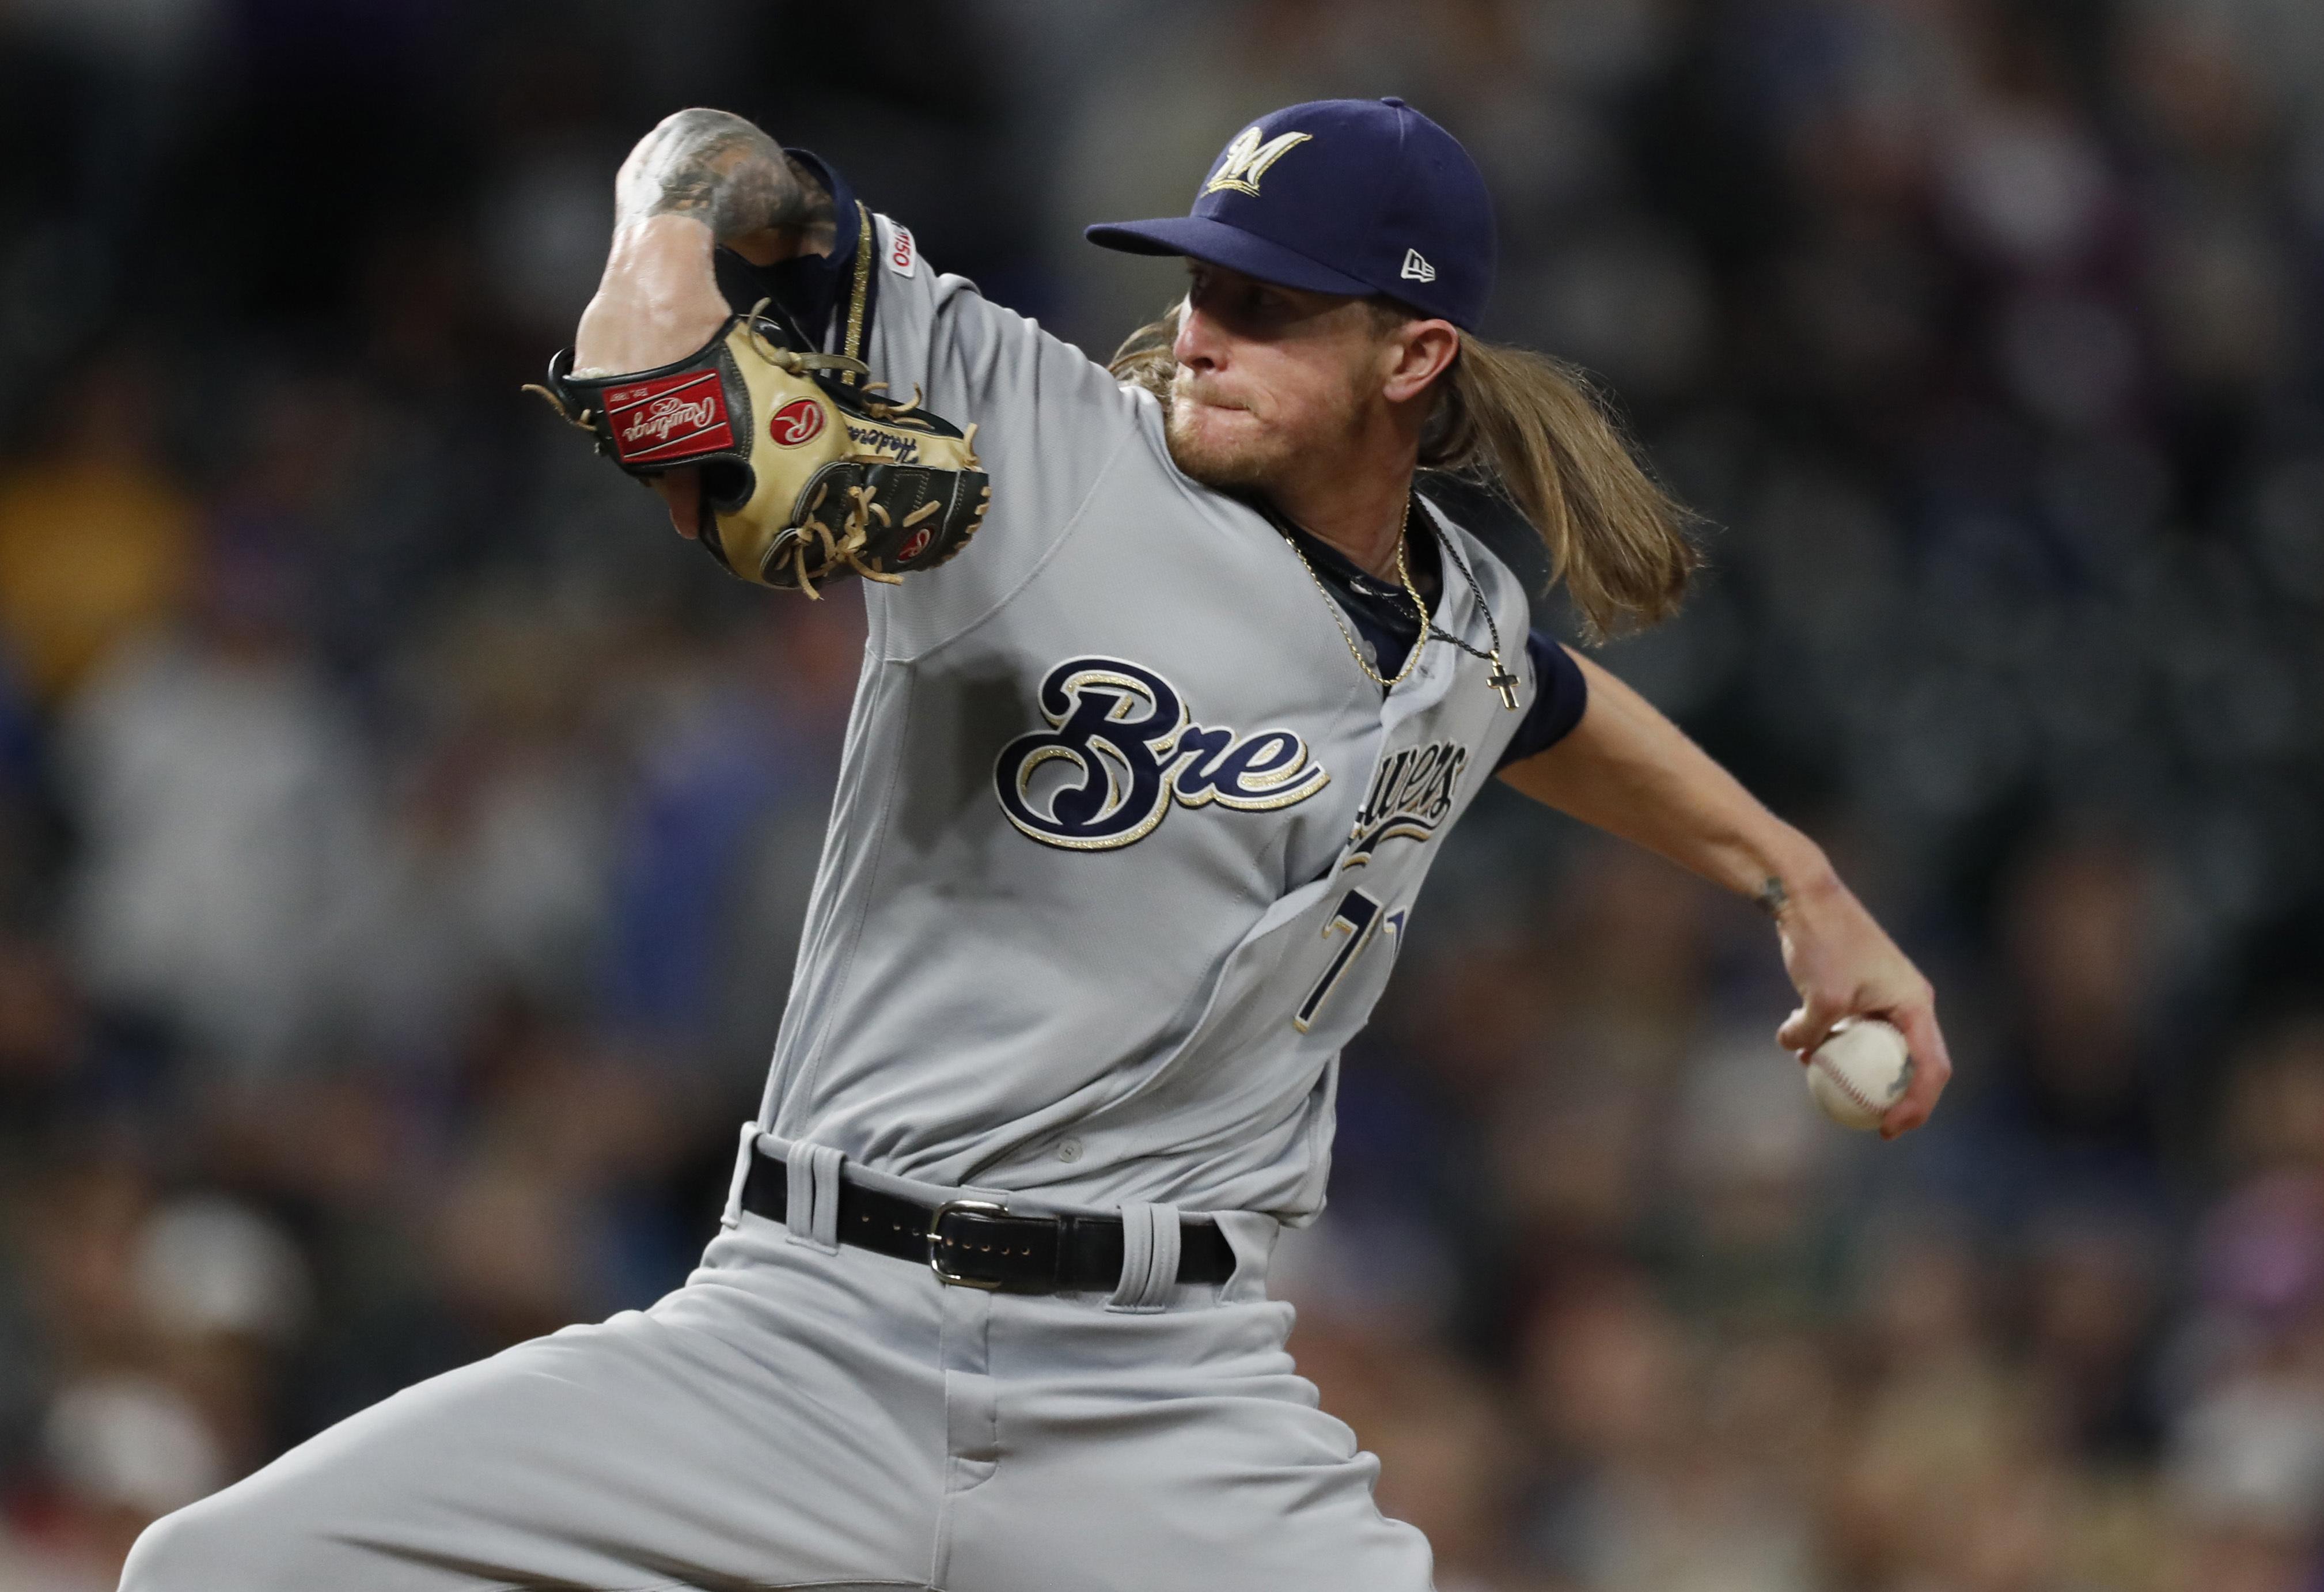 Enter Josh Hader, the Middle-Innings 'Closer' - The New York Times